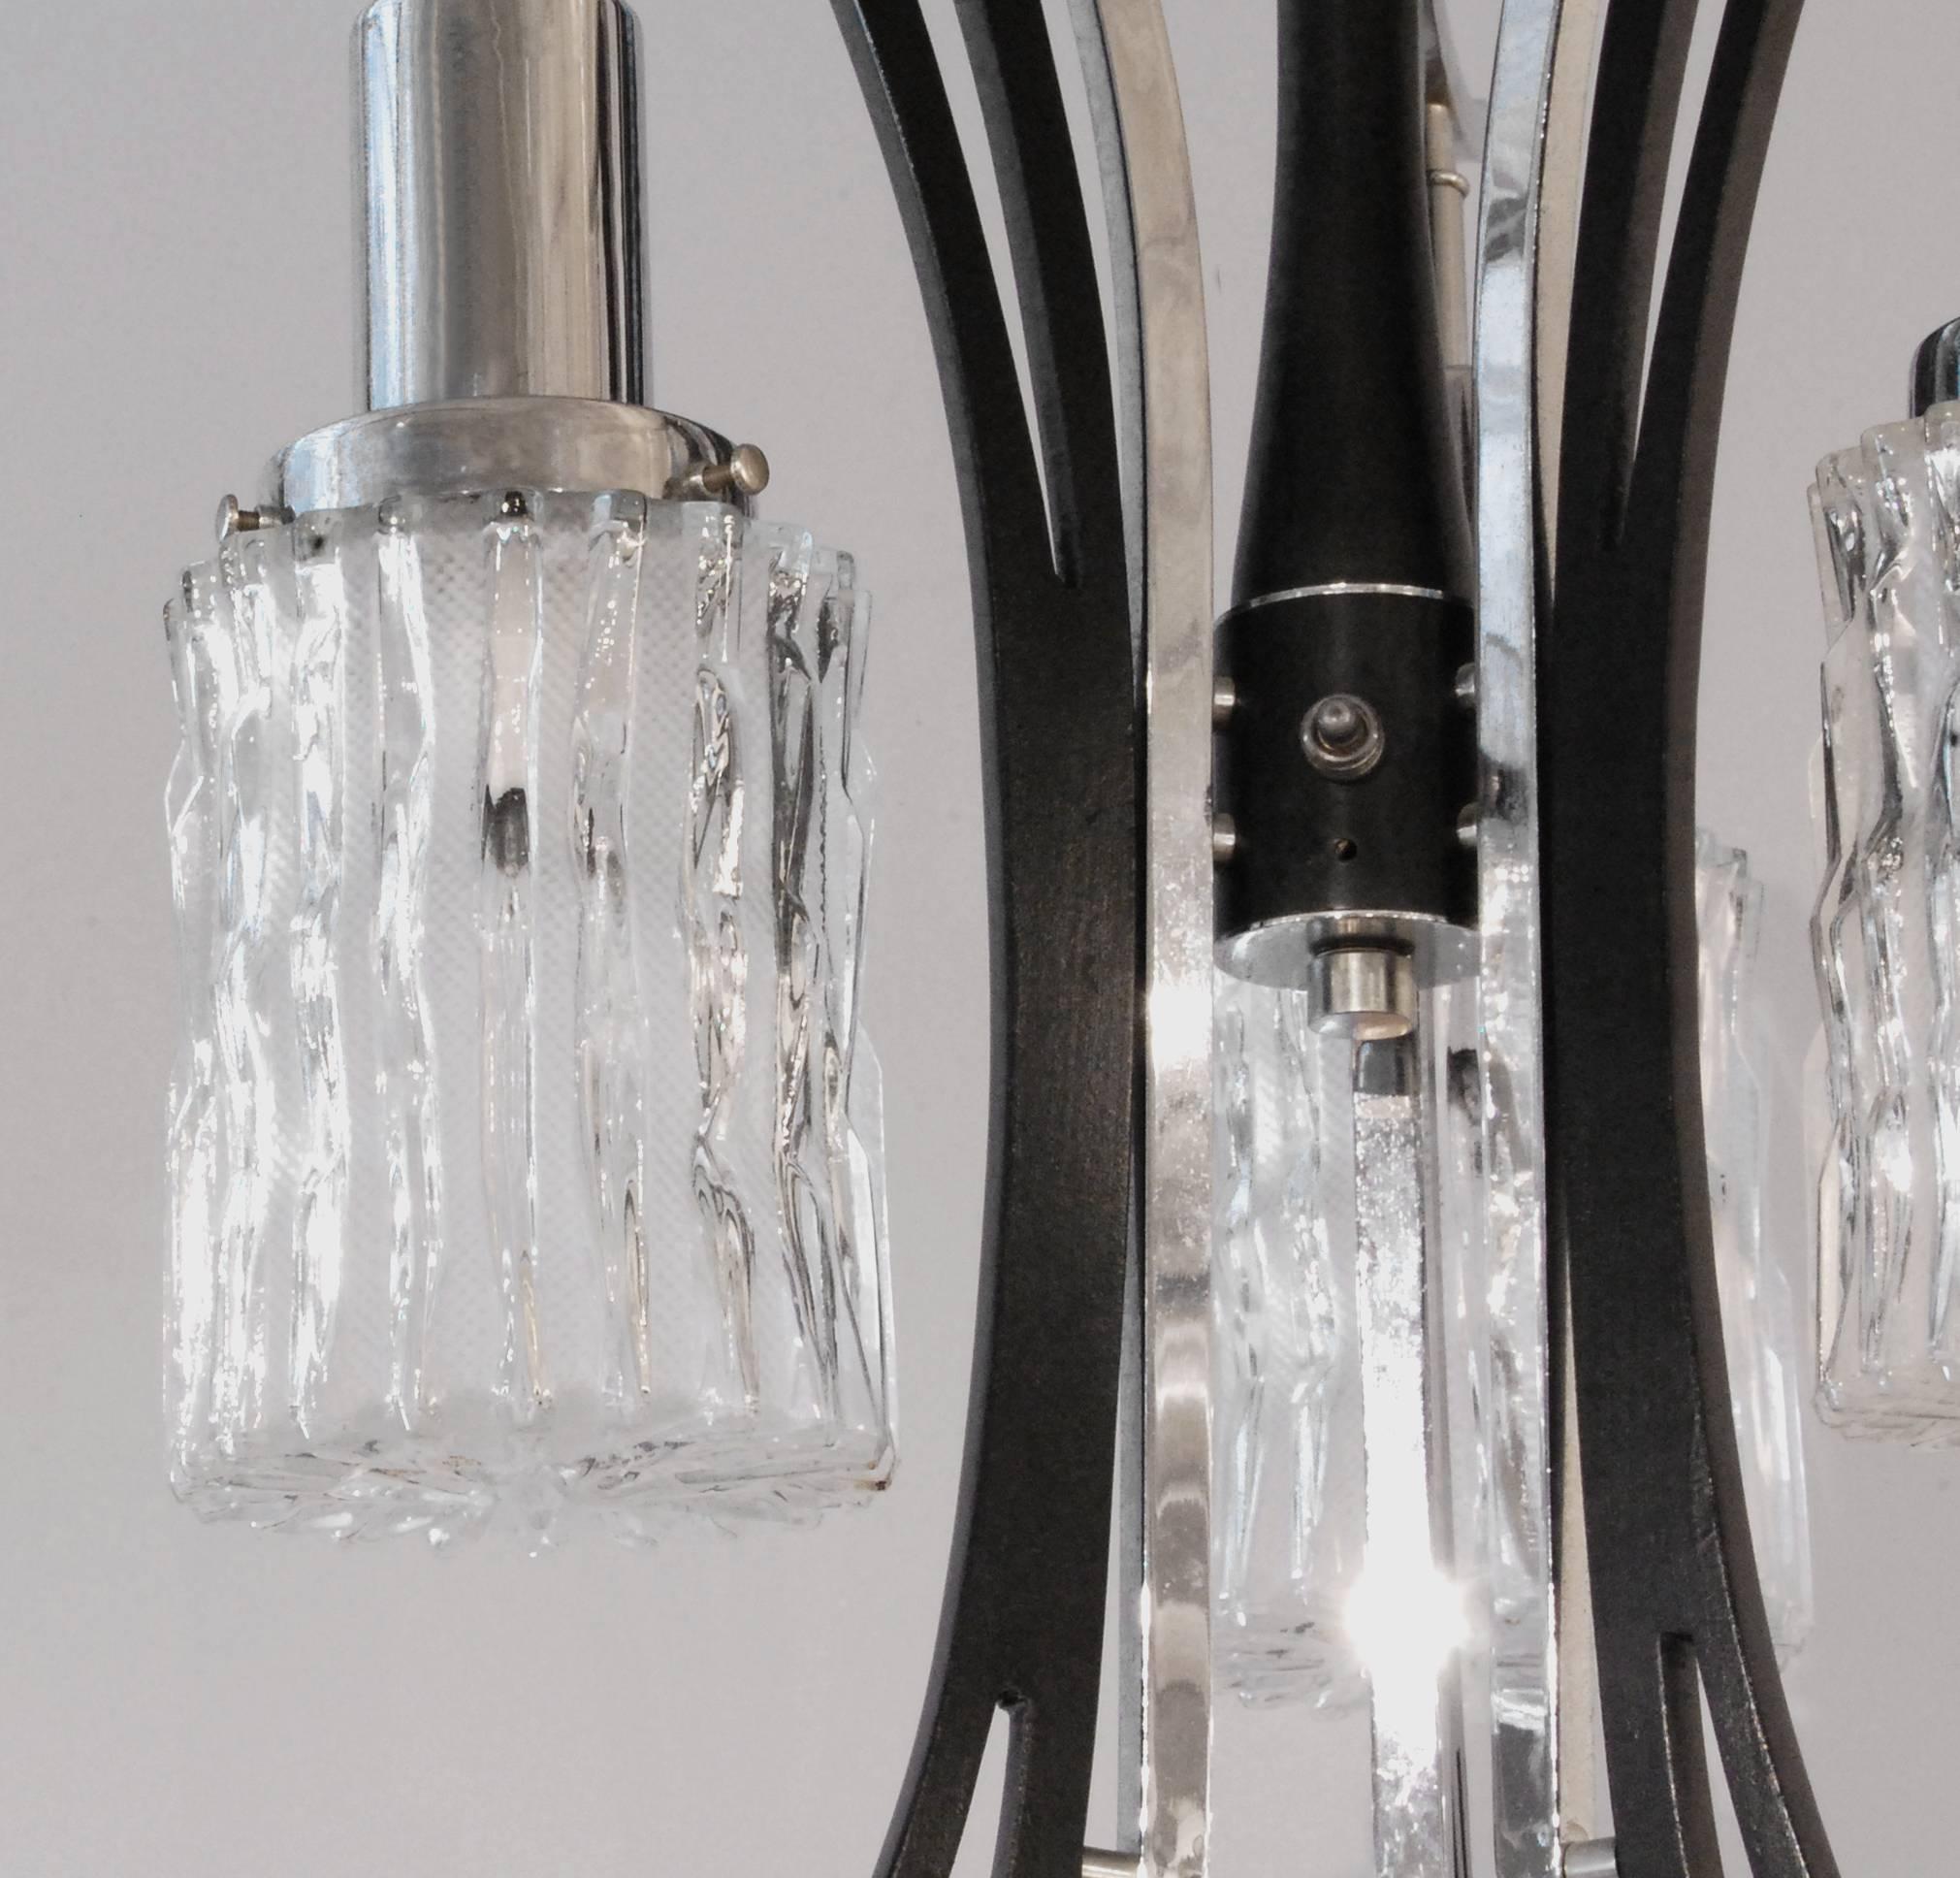 Chinese style chandelier with three molded glass shades, American, 1960s.
The drop of this chandelier can be customized with a different chain or rod.
   